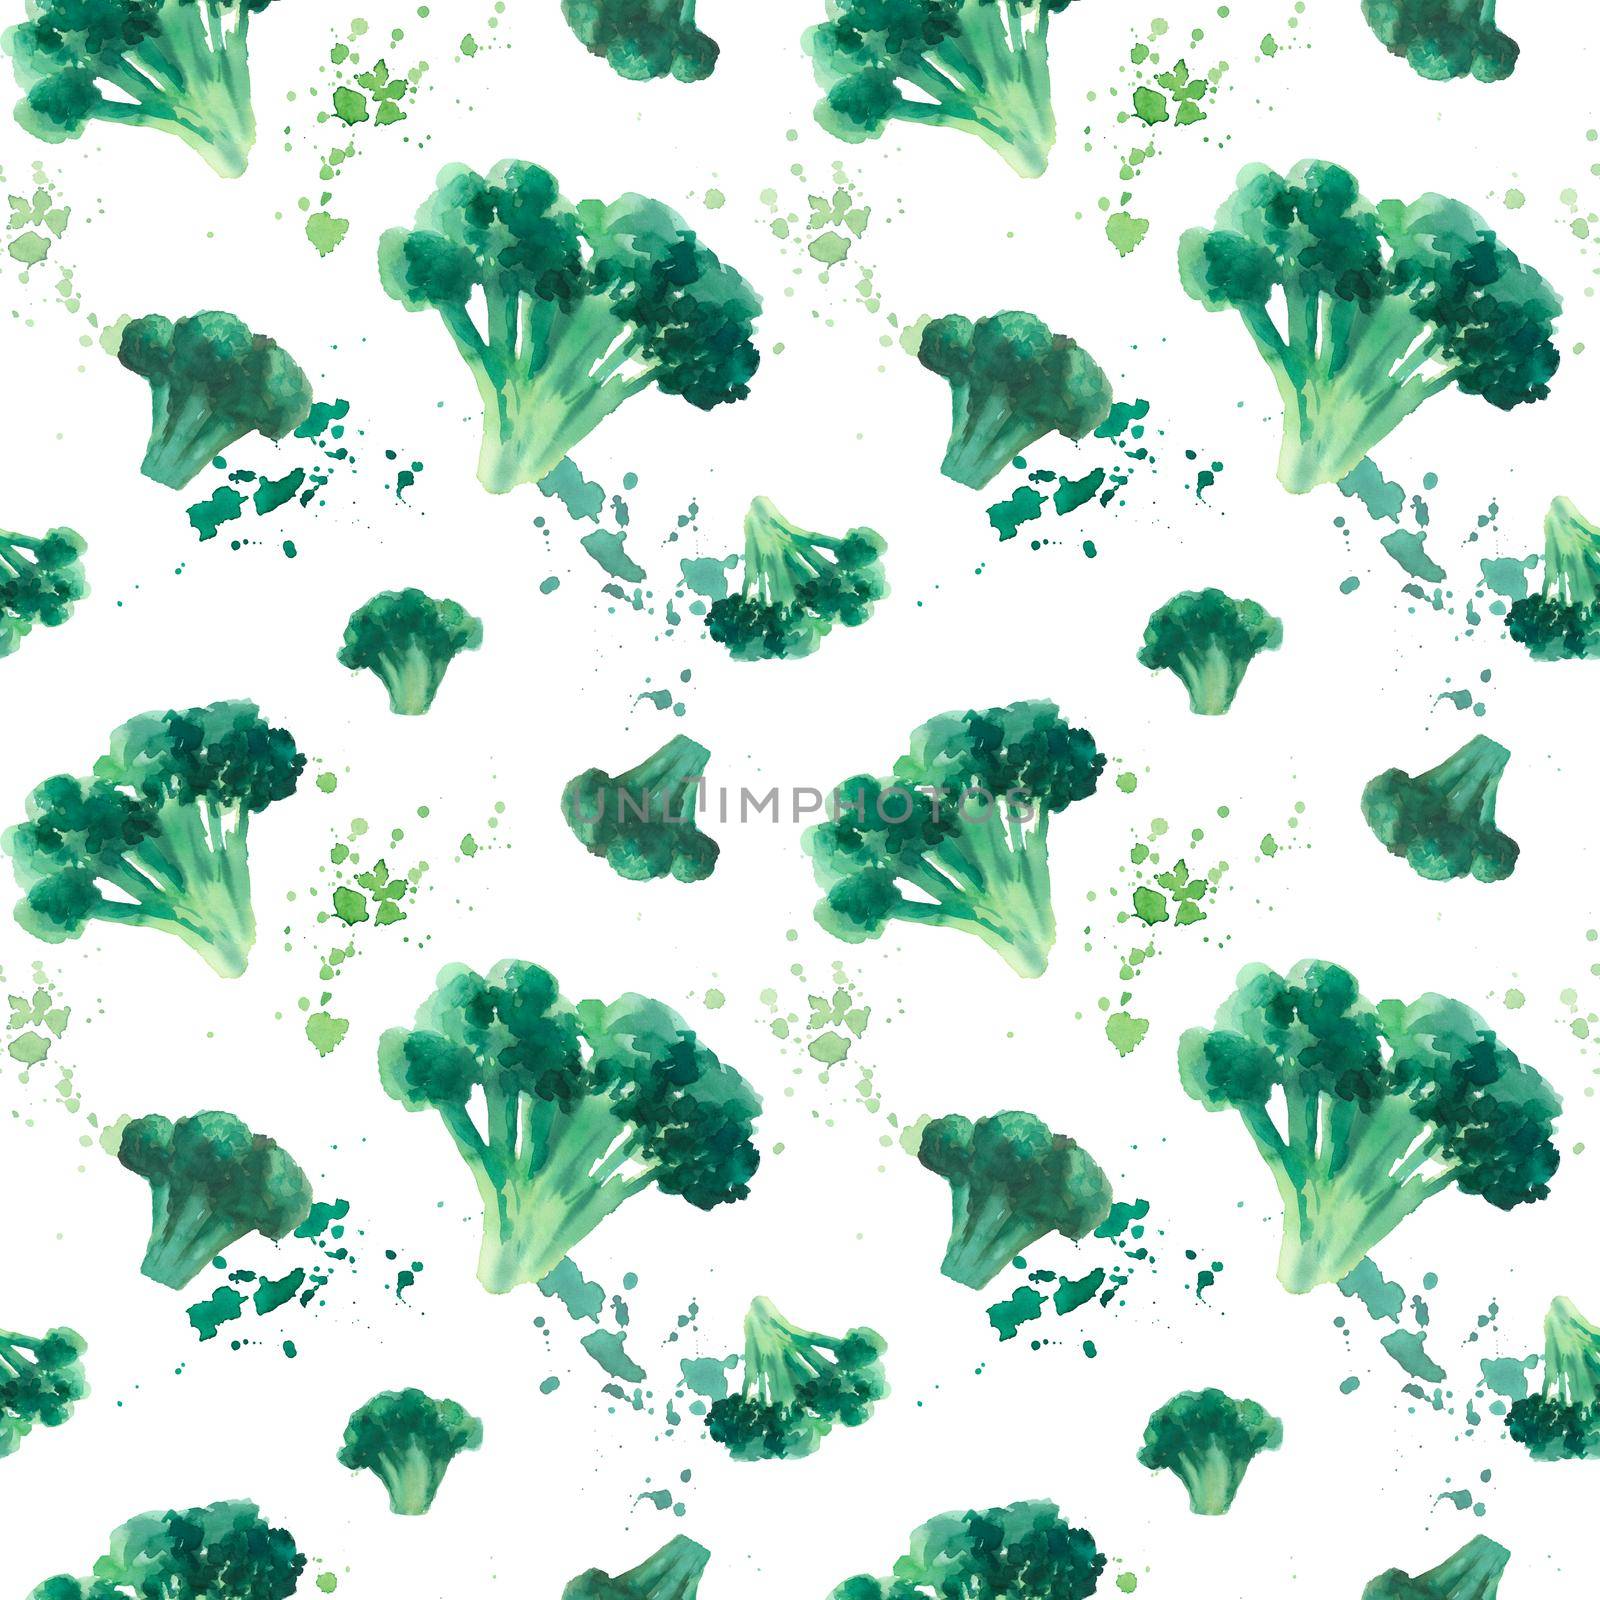 Watercolor seamless pattern with vegetables broccoli and splashes of paint on white background. Endless green Pattern for kitchen textiles by ElenaPlatova